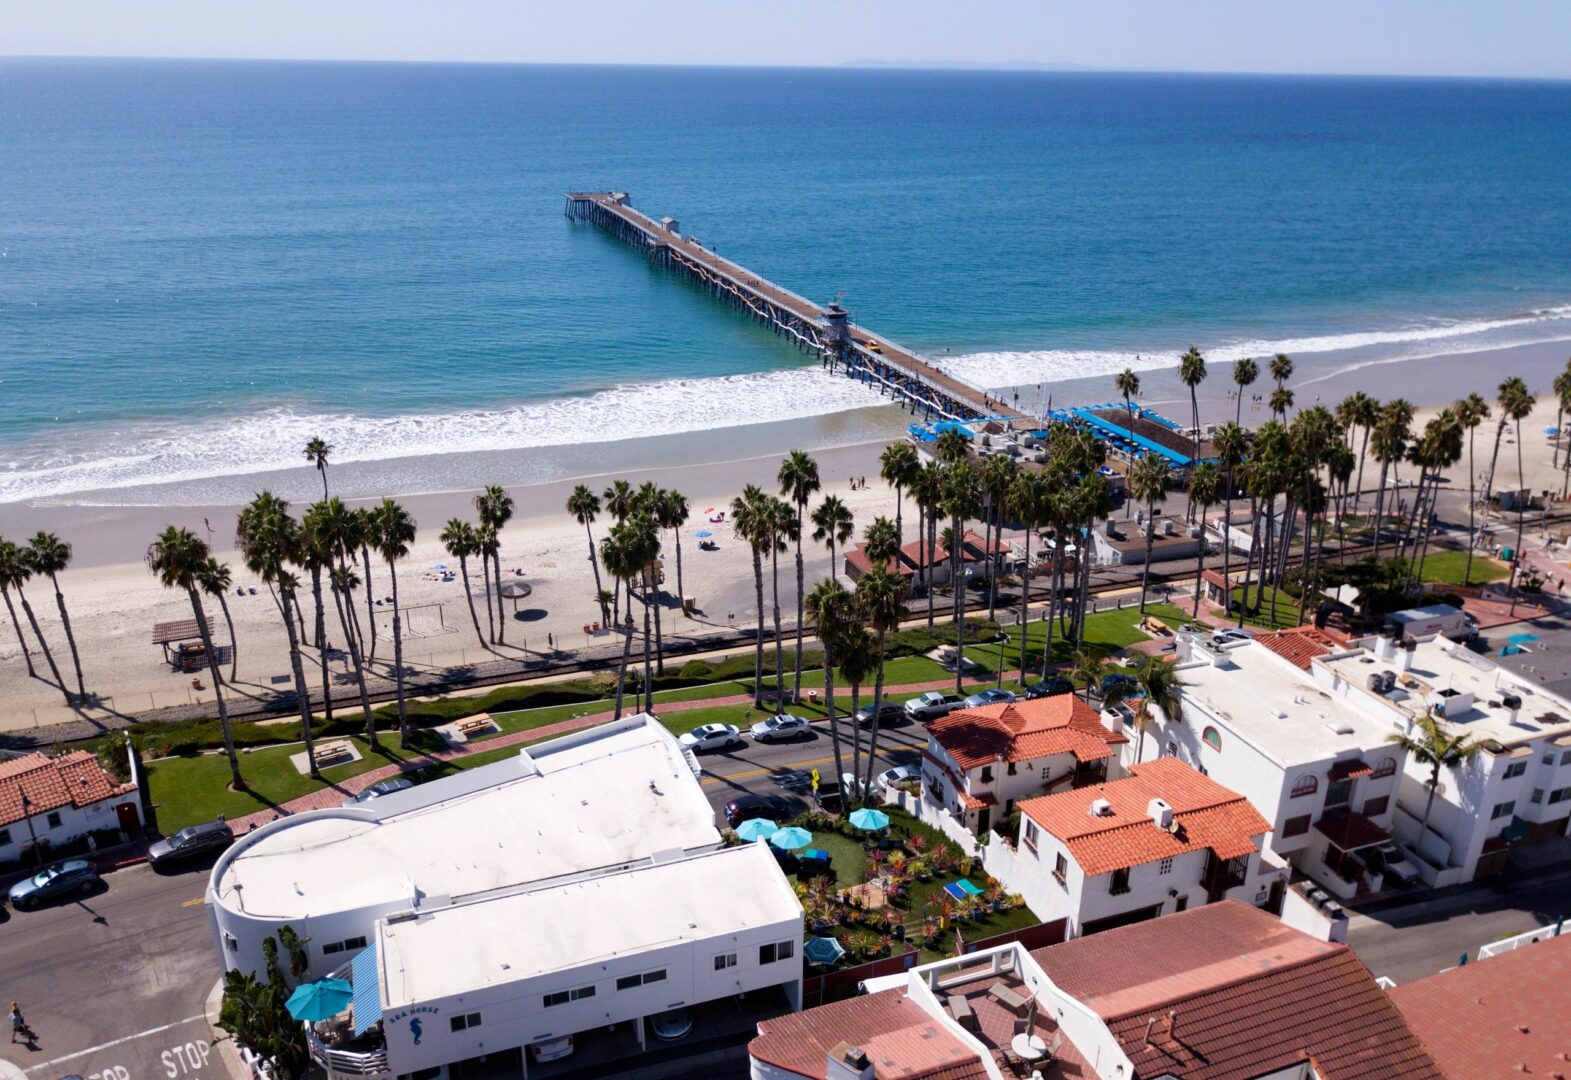 A view of the ocean from above shows palm trees, buildings and pier.